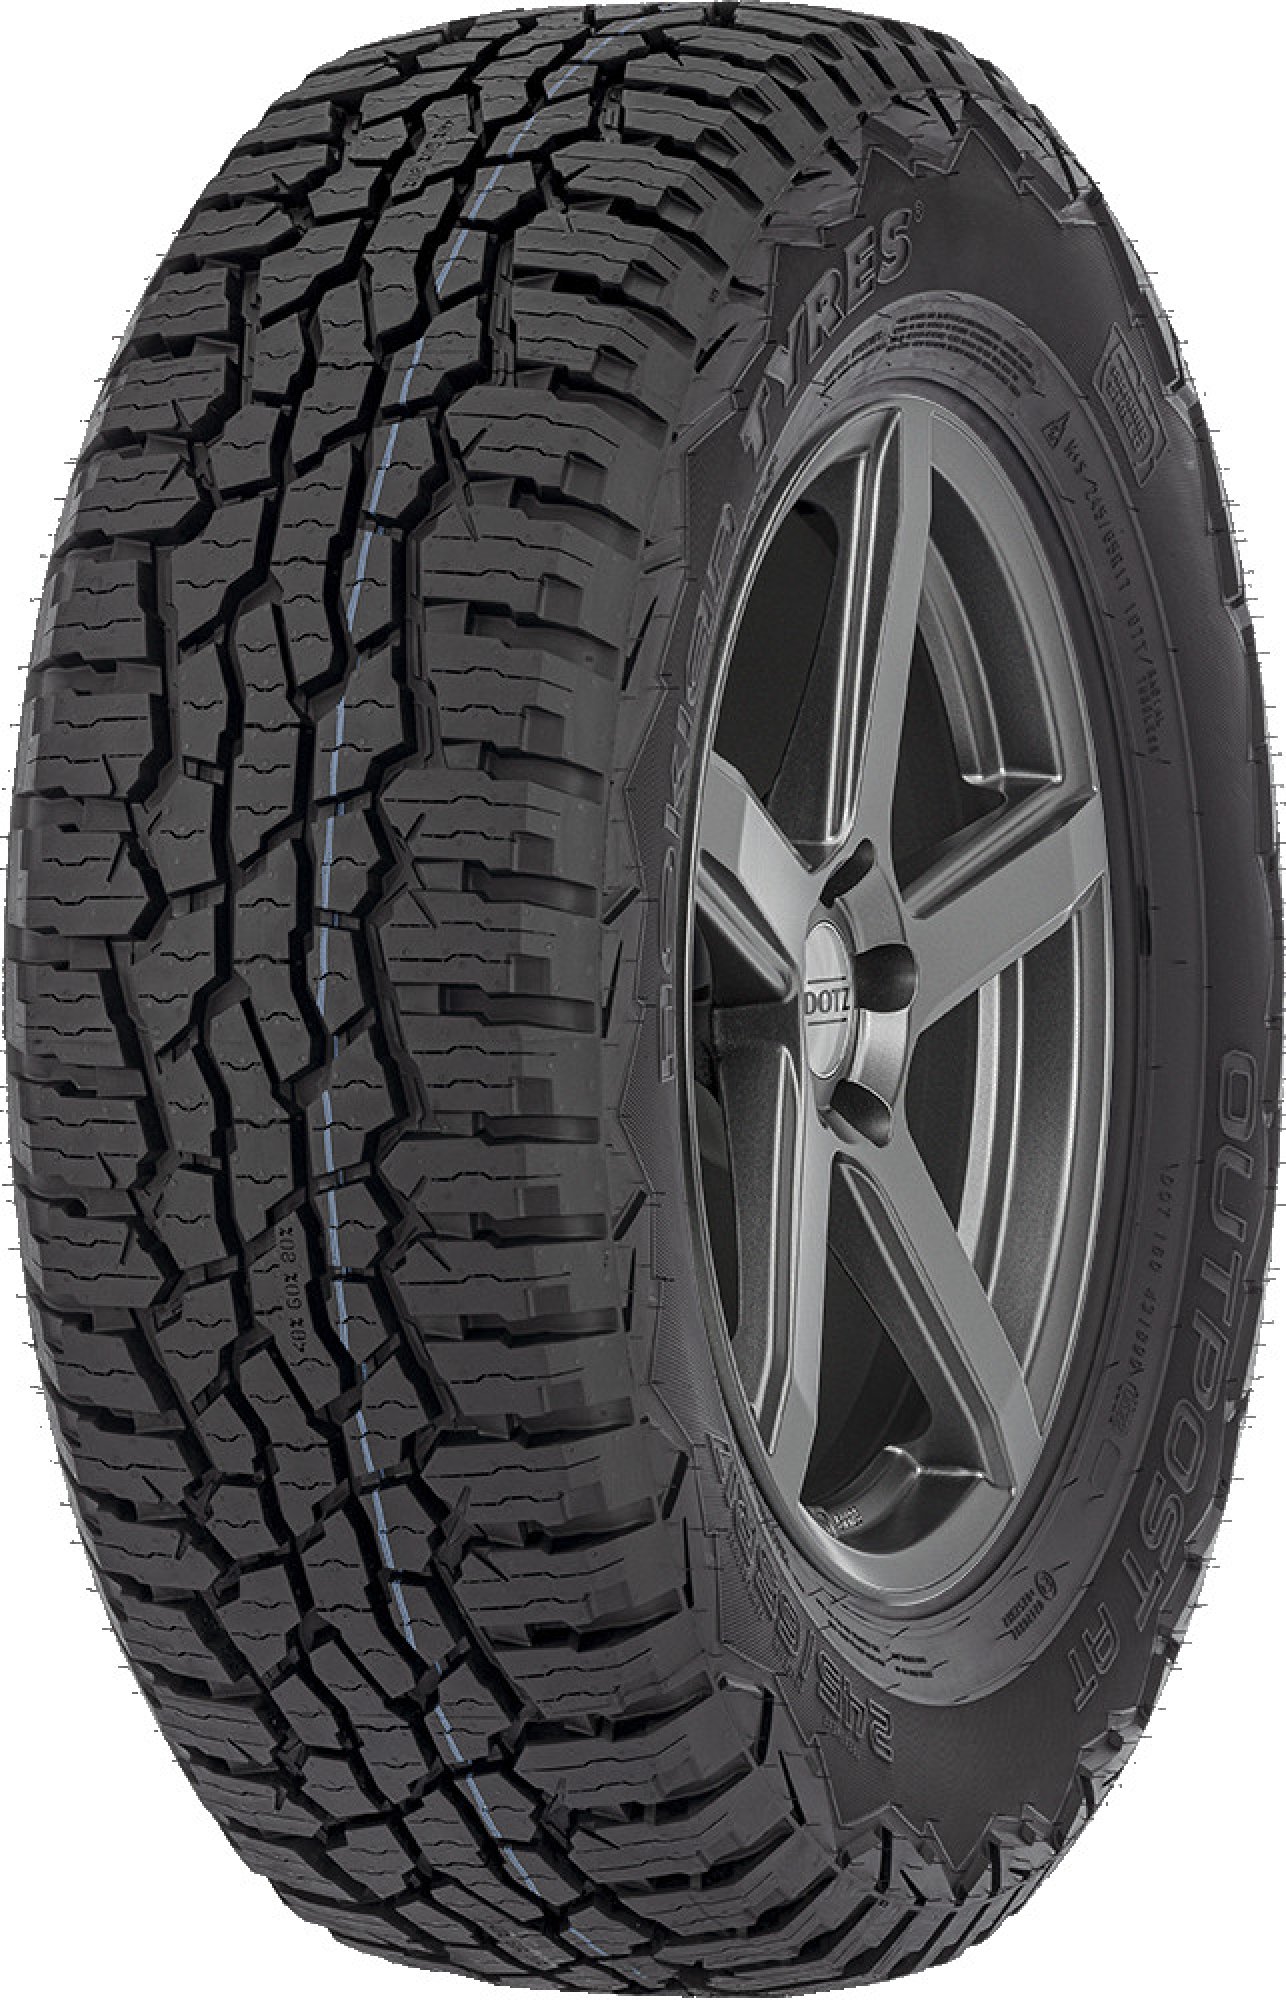 NOKIAN TYRES OUTPOST AT 255/70 R 17 112T